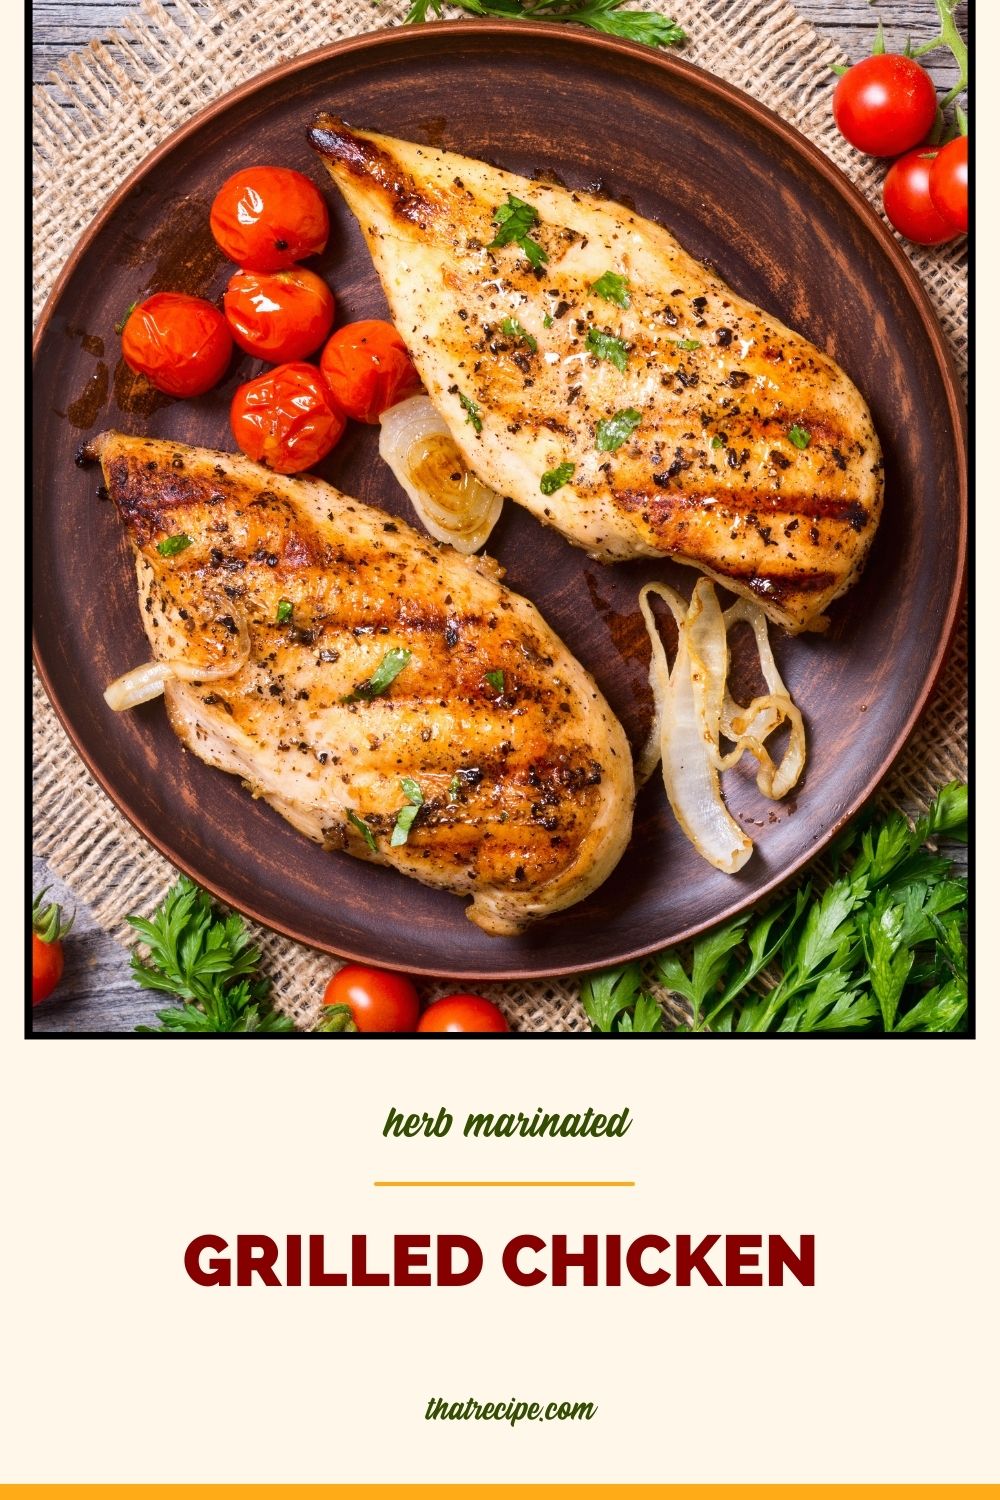 Easy herb marinated grilled chicken is a healthy and flavorful dish that can be prepped ahead of time and cooked just before serving.